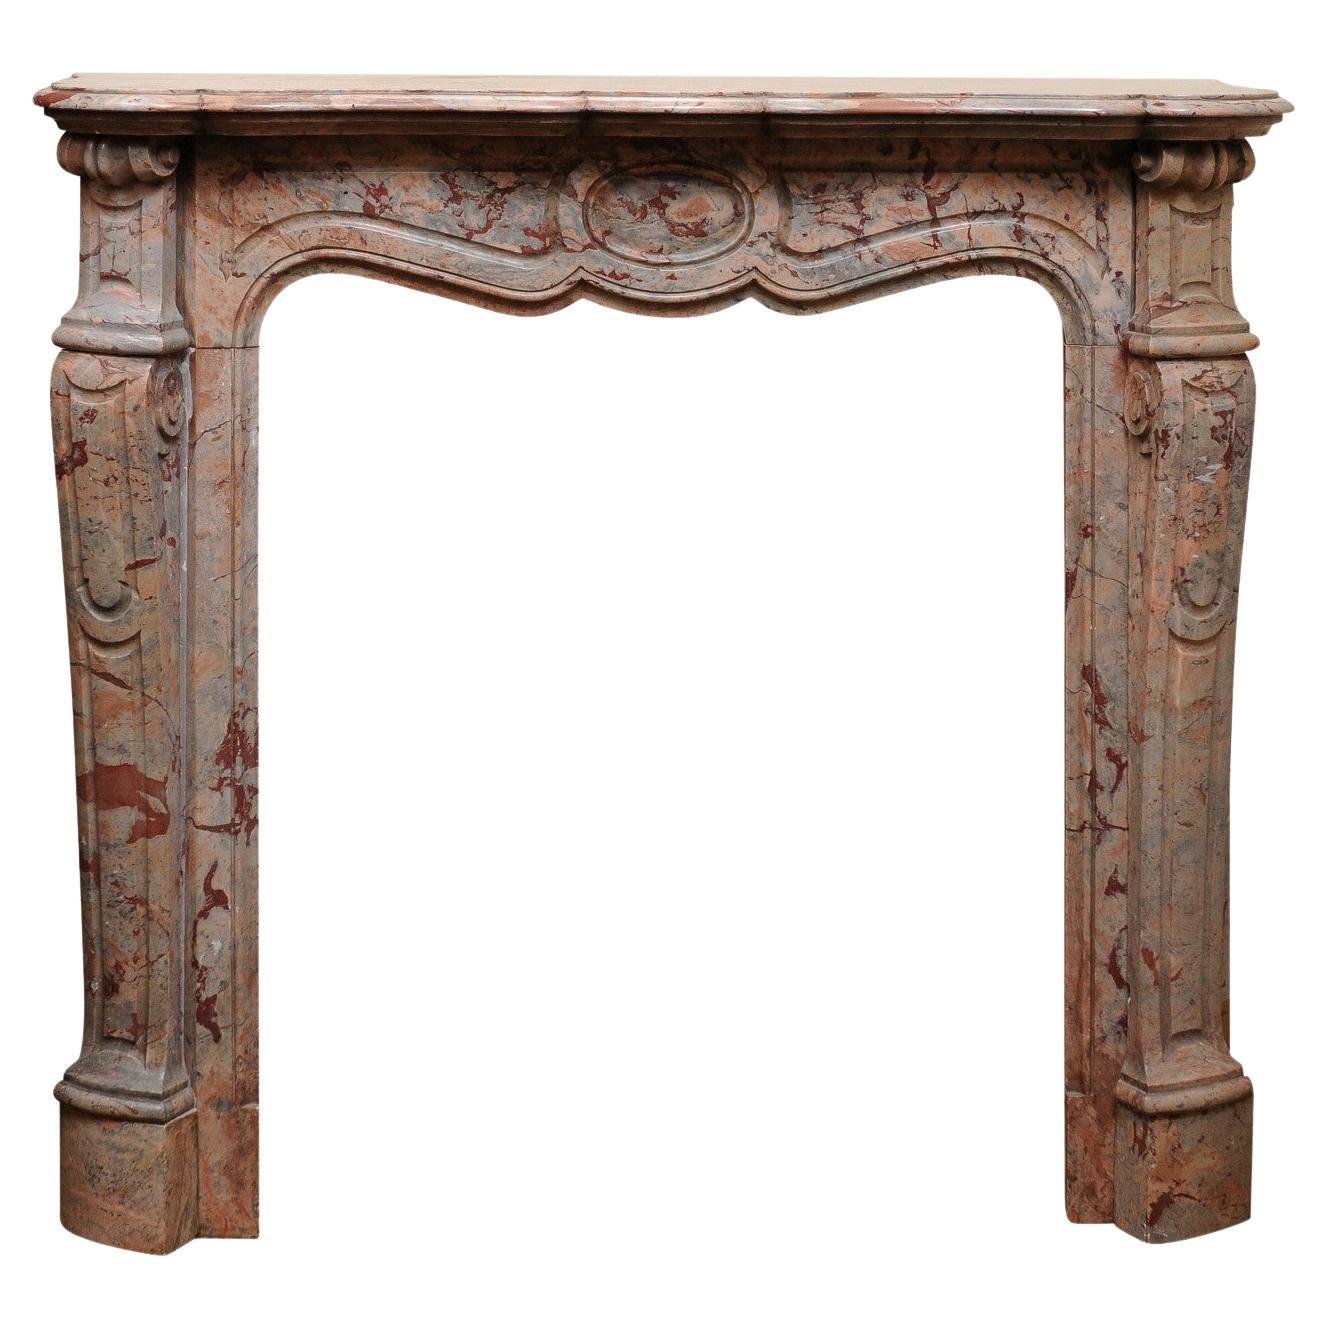 Petite Marble Mantel in Salmon & Grey Hues, 19th Century France